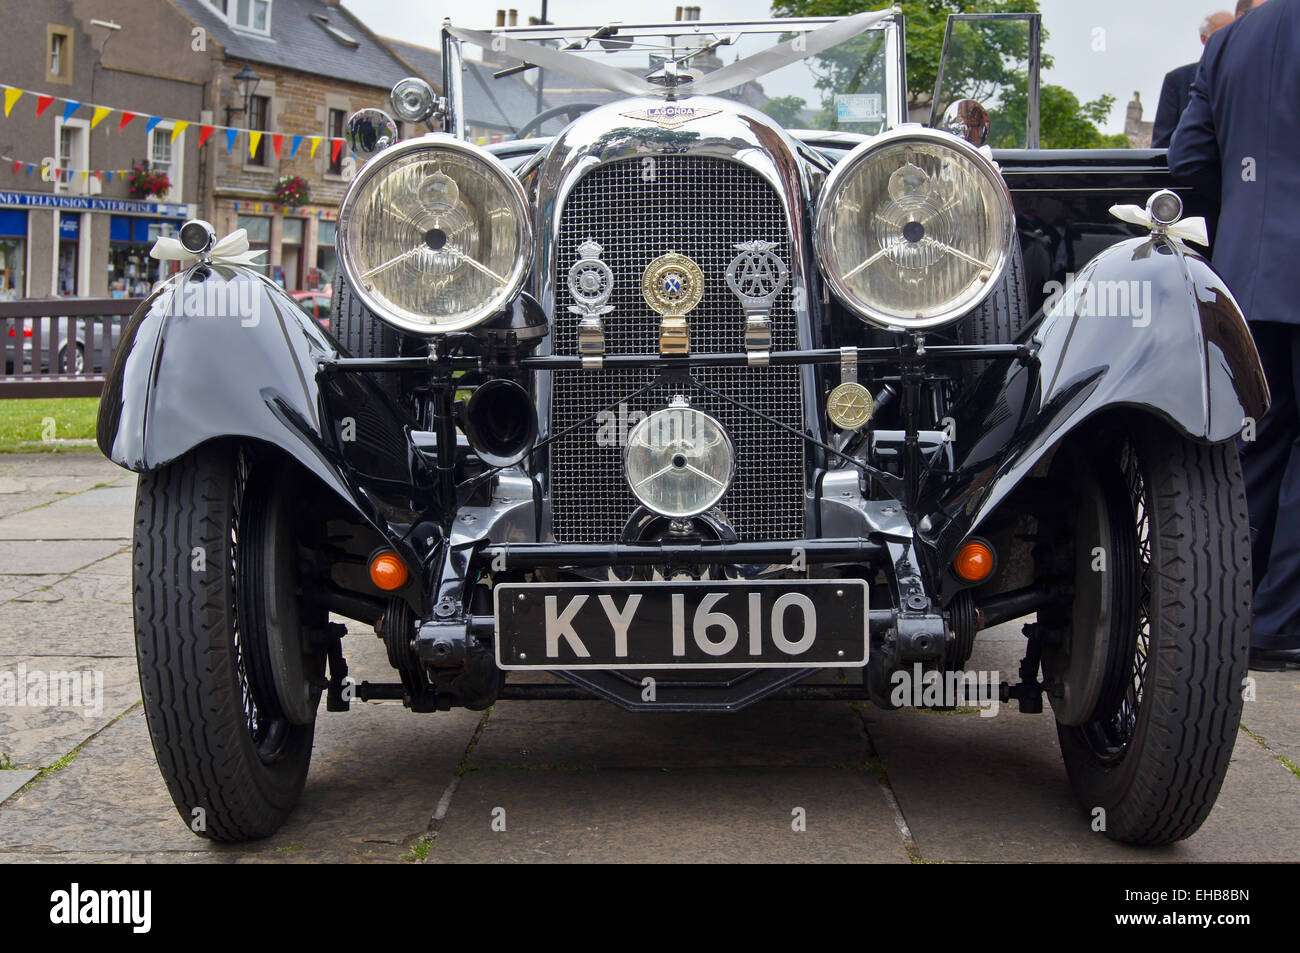 2-litre Carlton bodied Lagonda Speed drophead coupé, 1932, in use as a wedding limousine, Kirkwall, Orkney Islands, Scotland Stock Photo